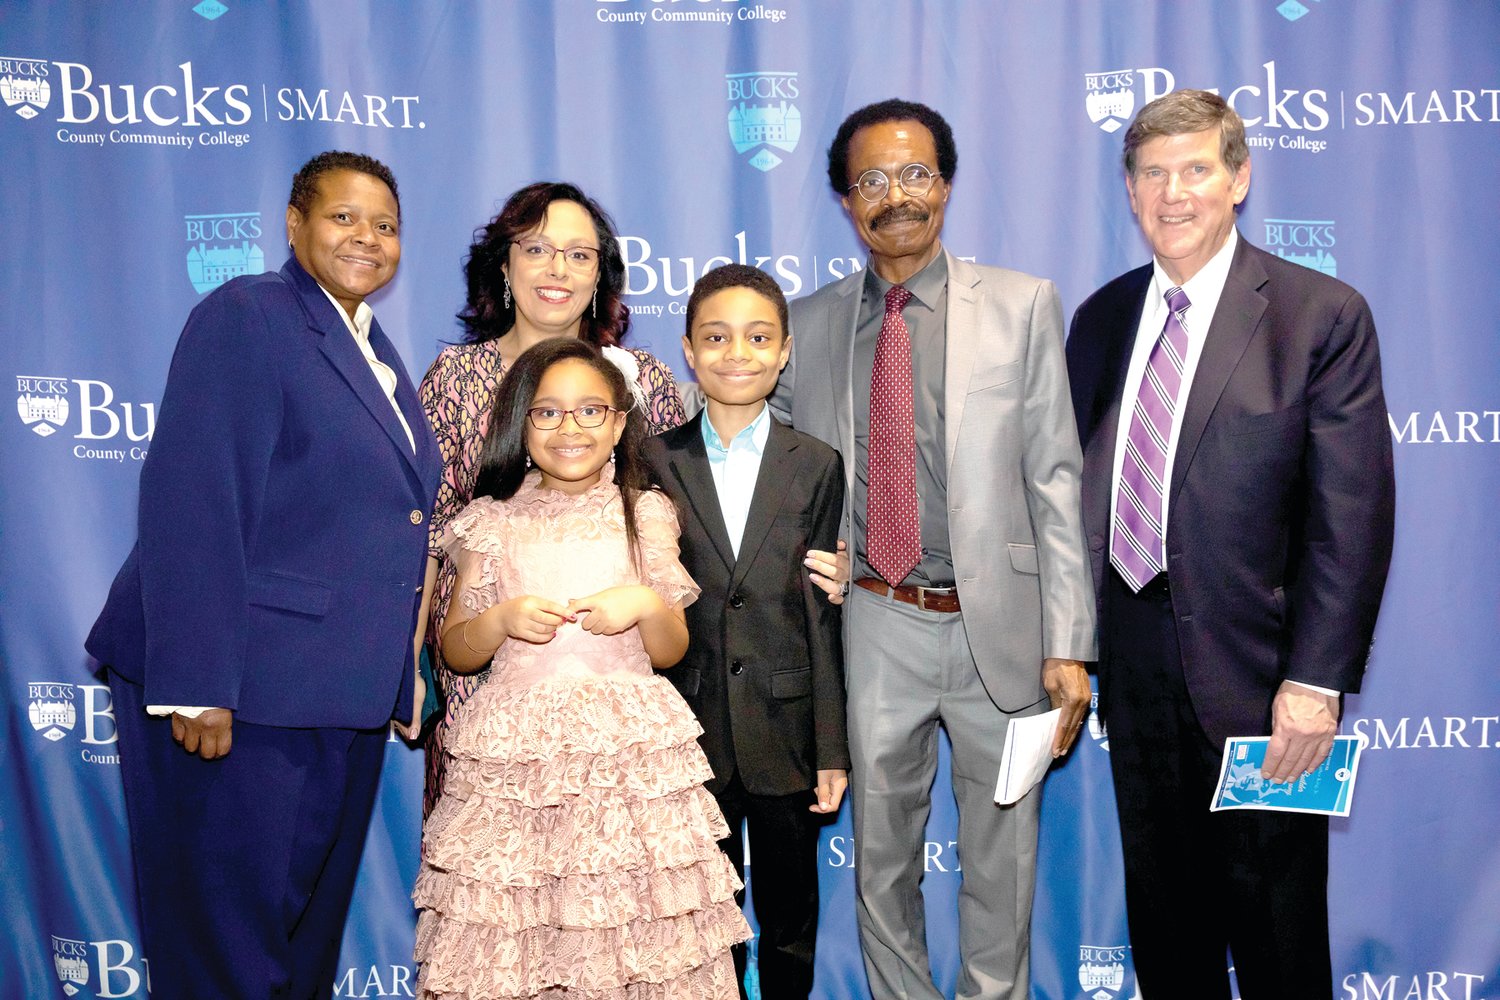 David Balogun, center, a 9-year-old Bensalem resident and Bucks County Community College student, was honored for his accomplishments at the college’s second annual Dr. Martin Luther King Jr. Dream Builders Awards ceremony. He was congratulated by Dr. Felicia Ganther, left, college president, and Tom Jennings, right, chair of the college’s board of trustees, and joined by his mother Ronya Balogun, father Henry Balogun and sister Eliana.